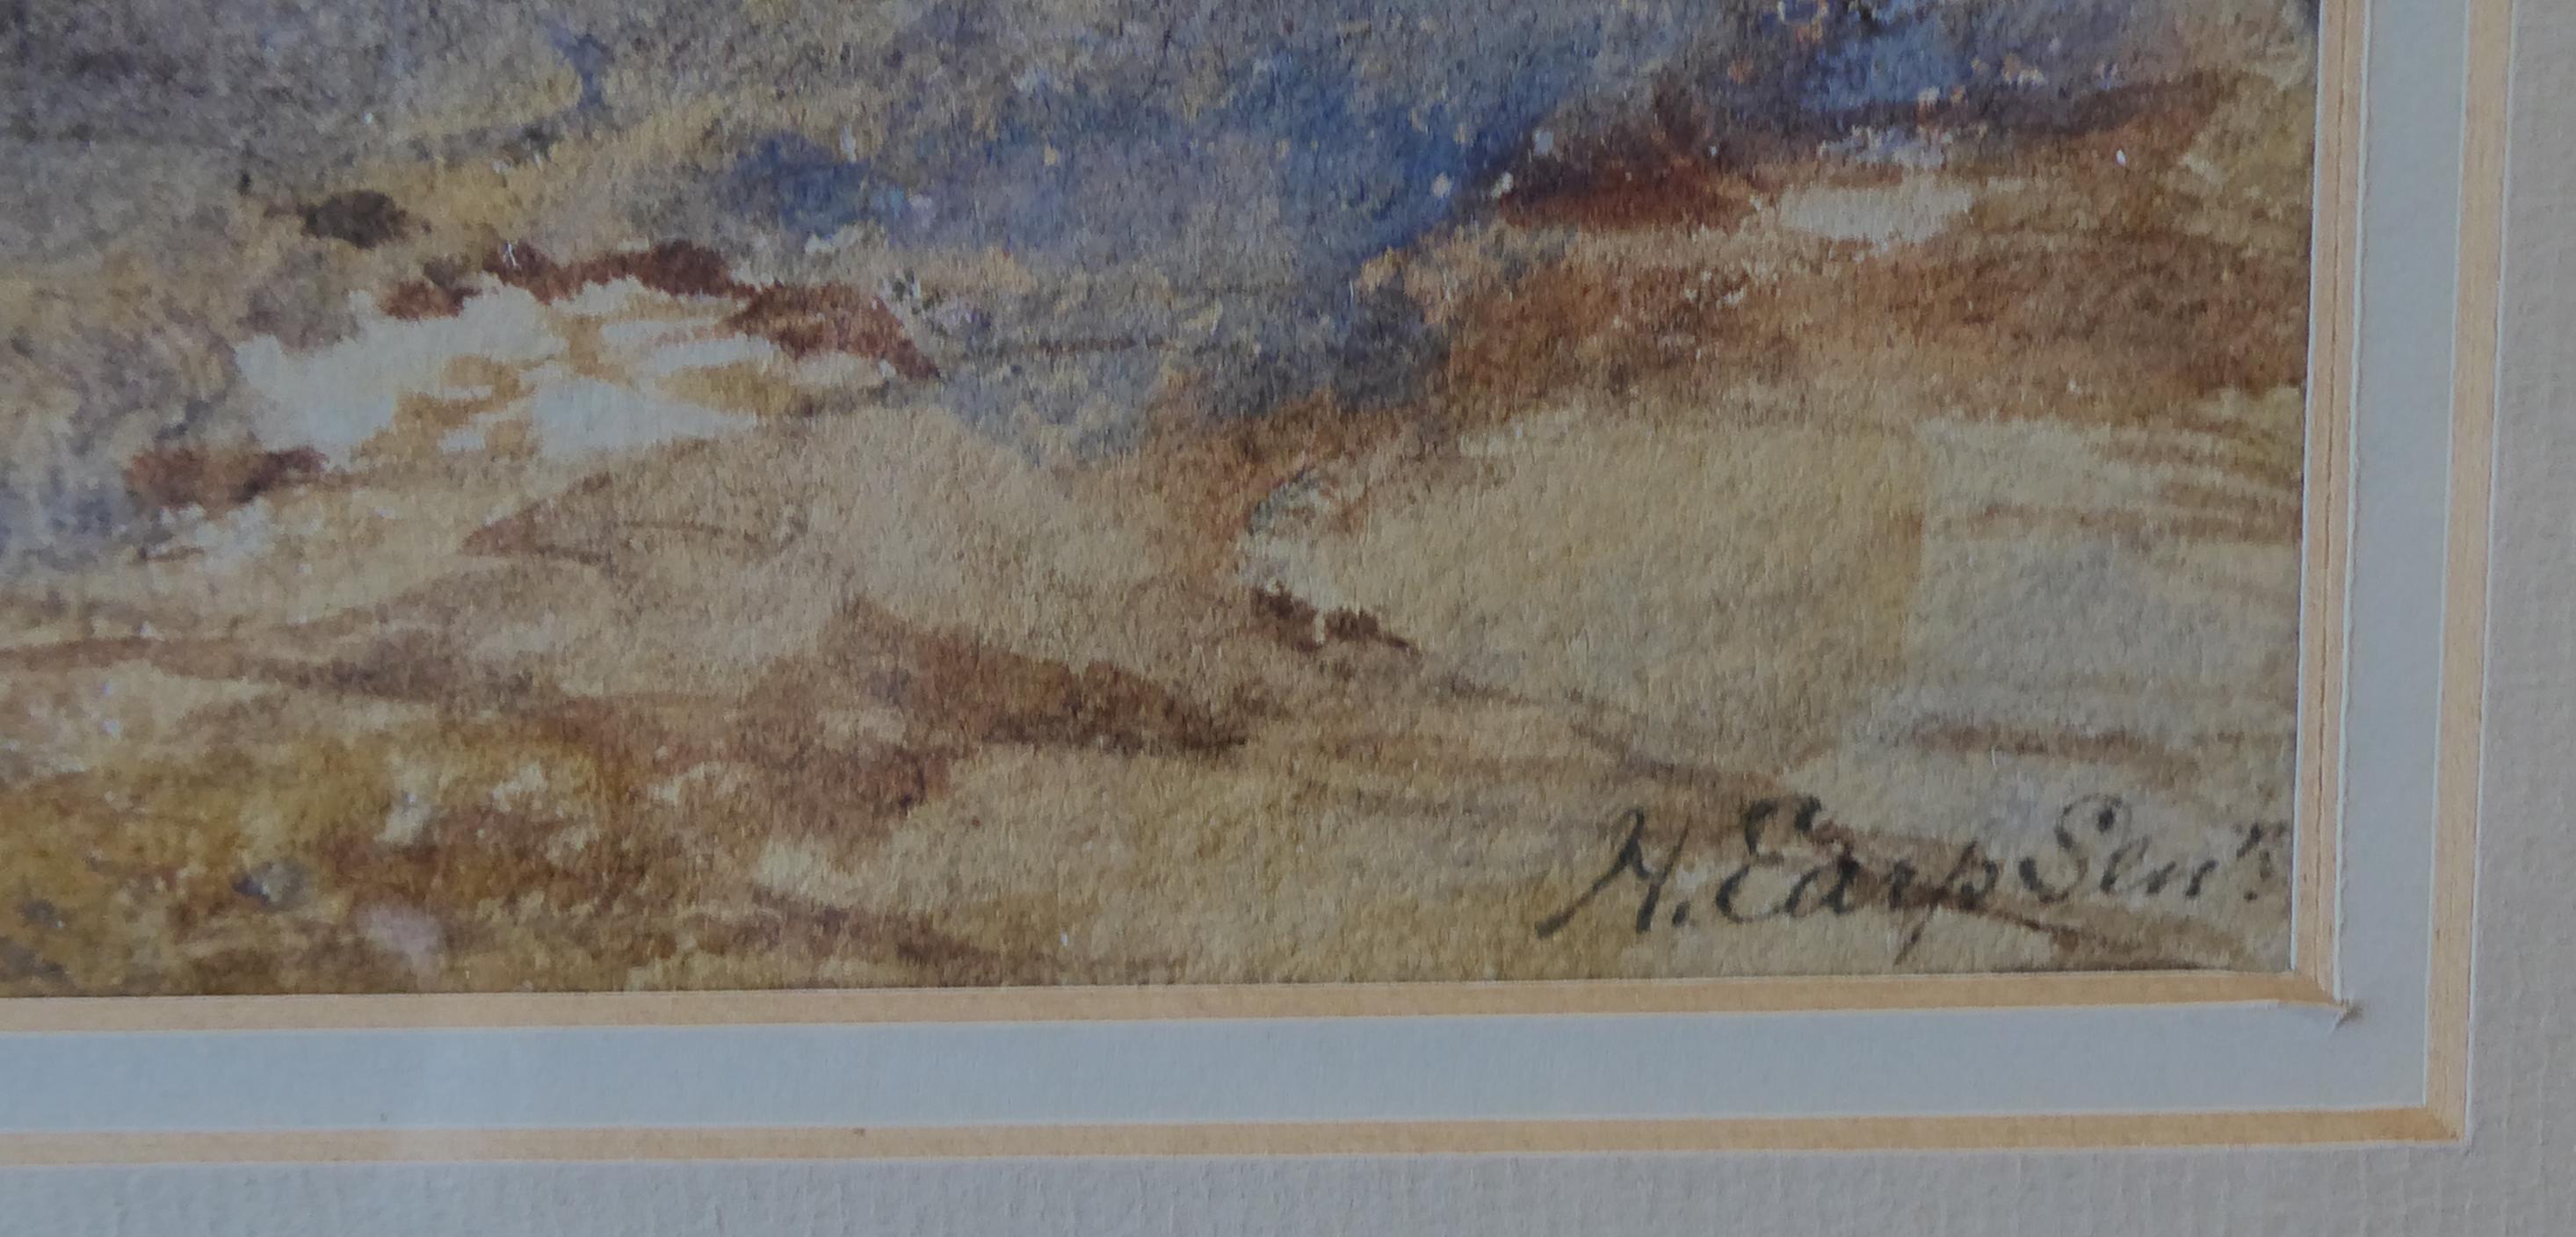 Scottish 'Stalking in the Highlands' Watercolor Signed William Henry Earp In Good Condition For Sale In Glencarse, Perthshire